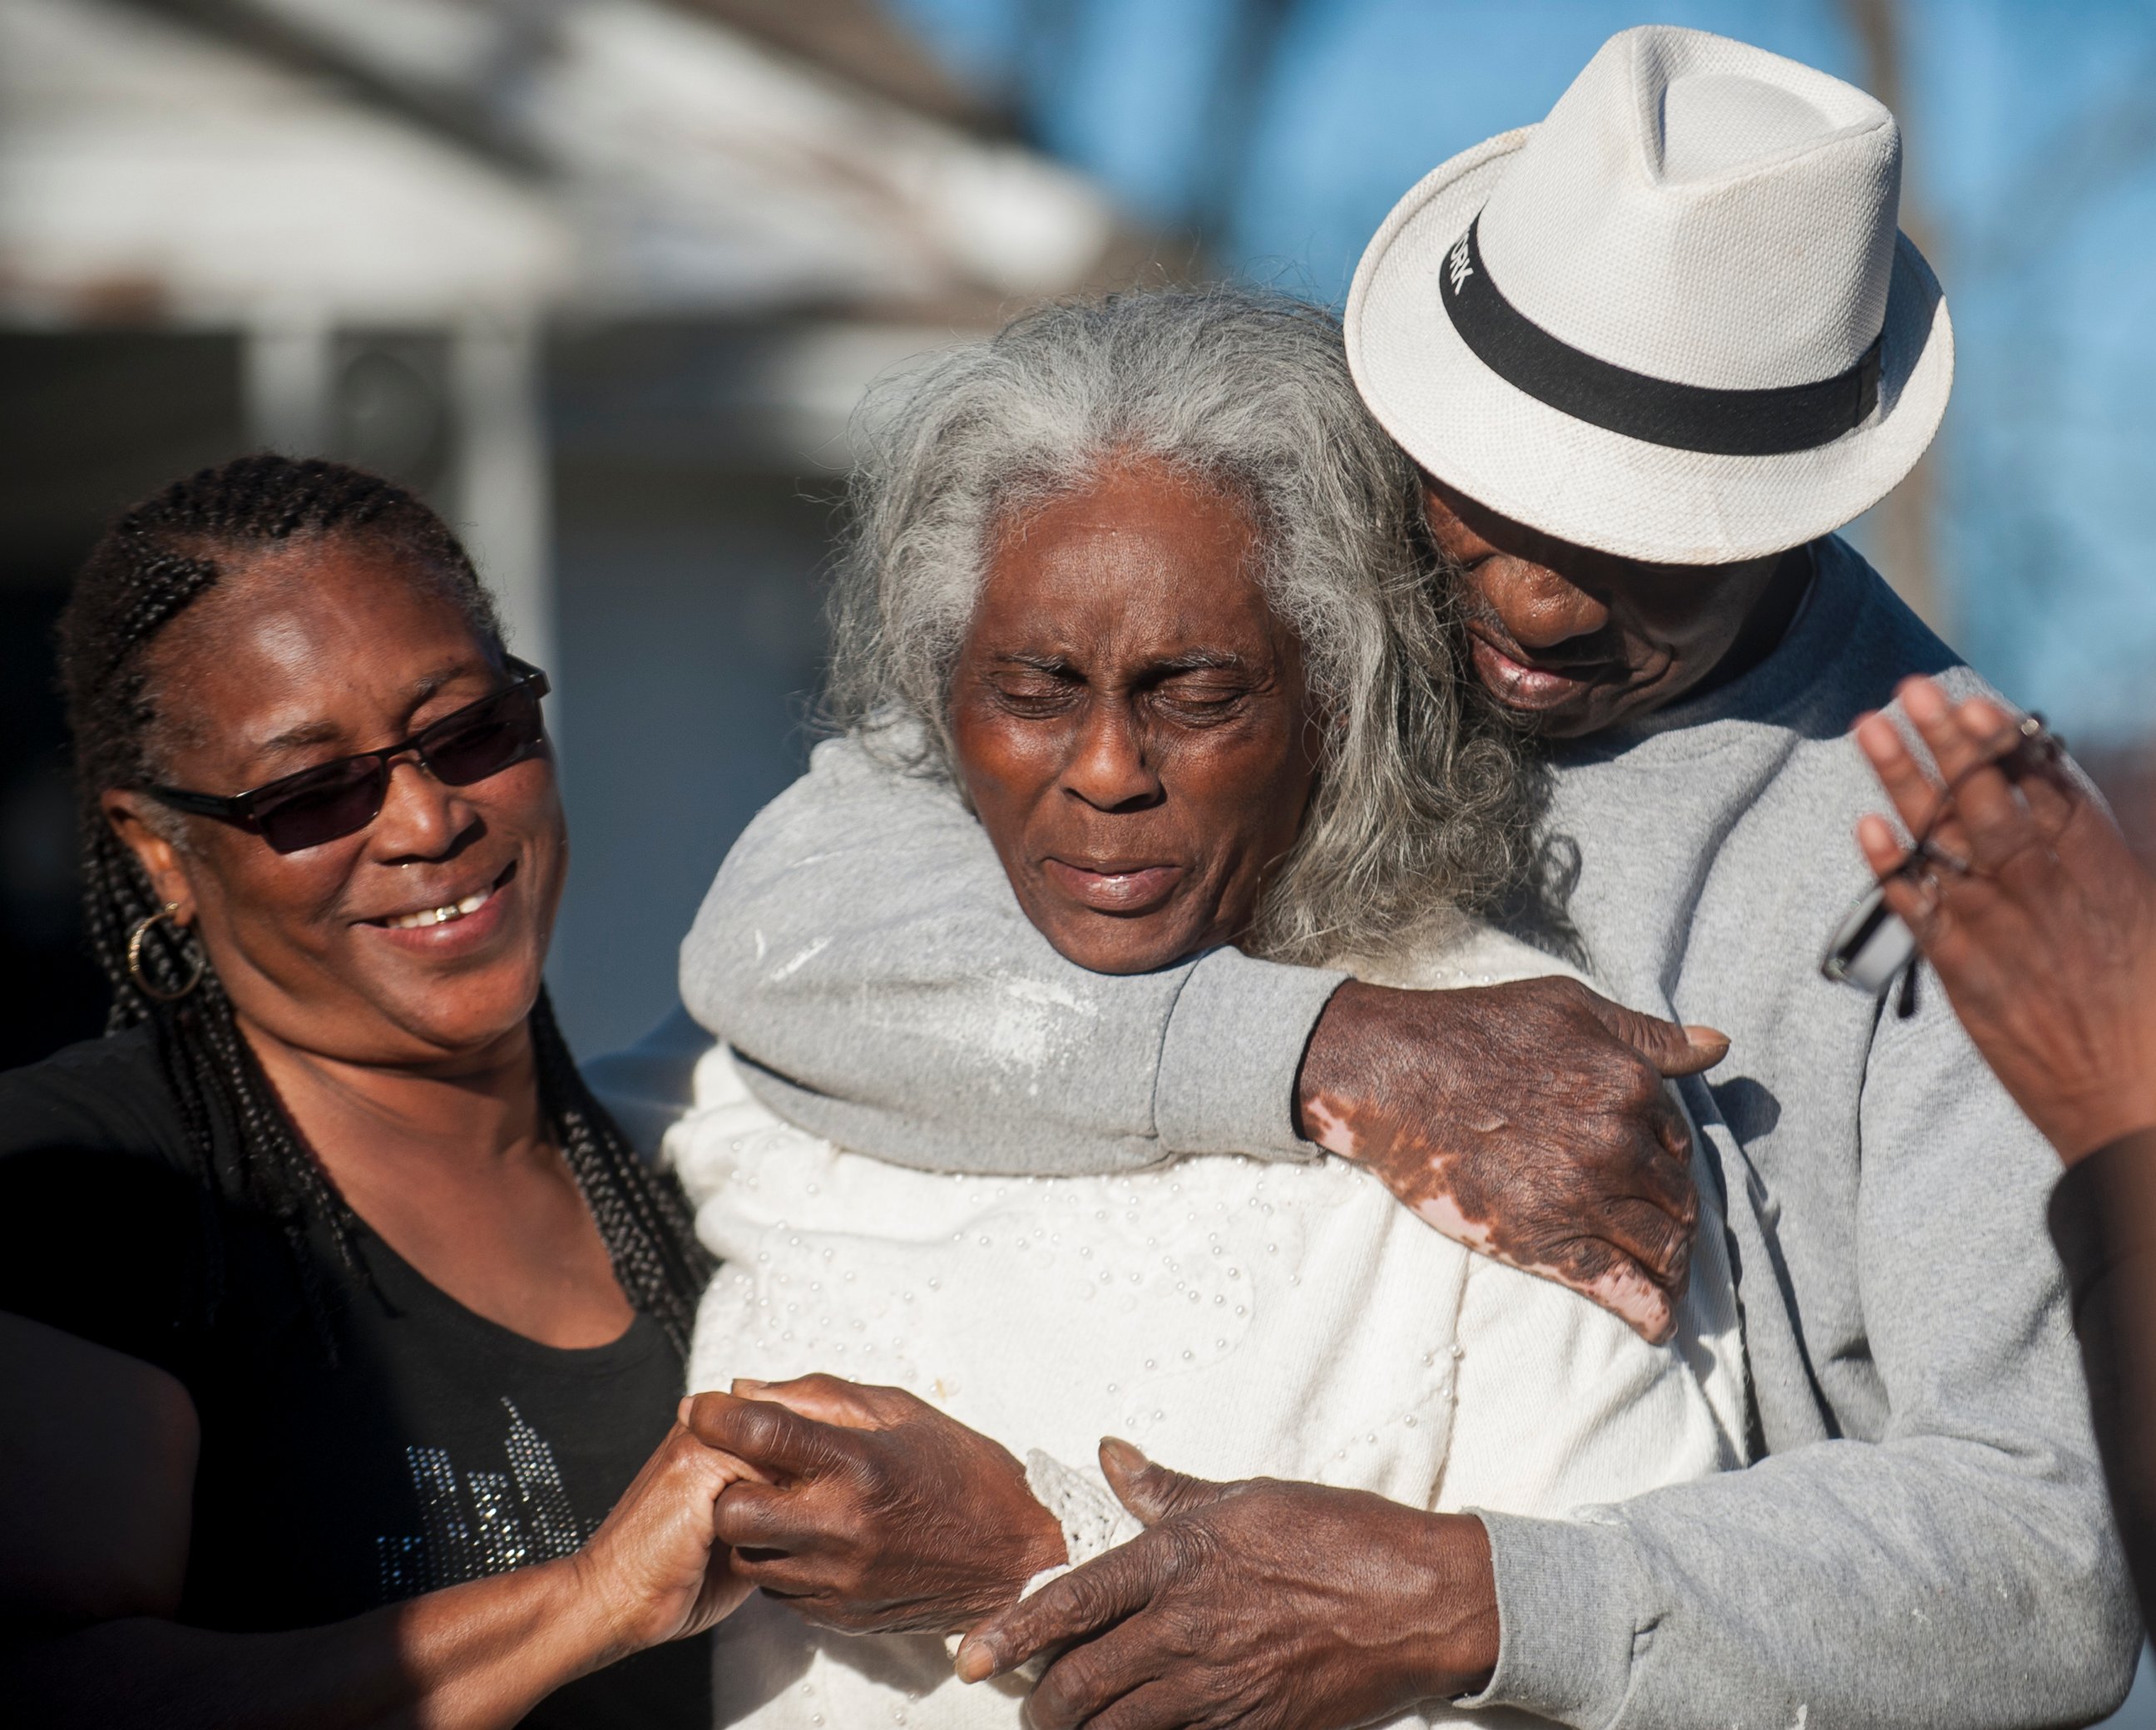 PHOTO: Nellie Ruth Gunn is comforted by supporters after Montgomery District Attorney Daryl Bailey announced on Wednesday, March 2, 2016, that Montgomery Police Officer Aaron Smith was arrested in connection to the shooting death of her son Greg Gunn.